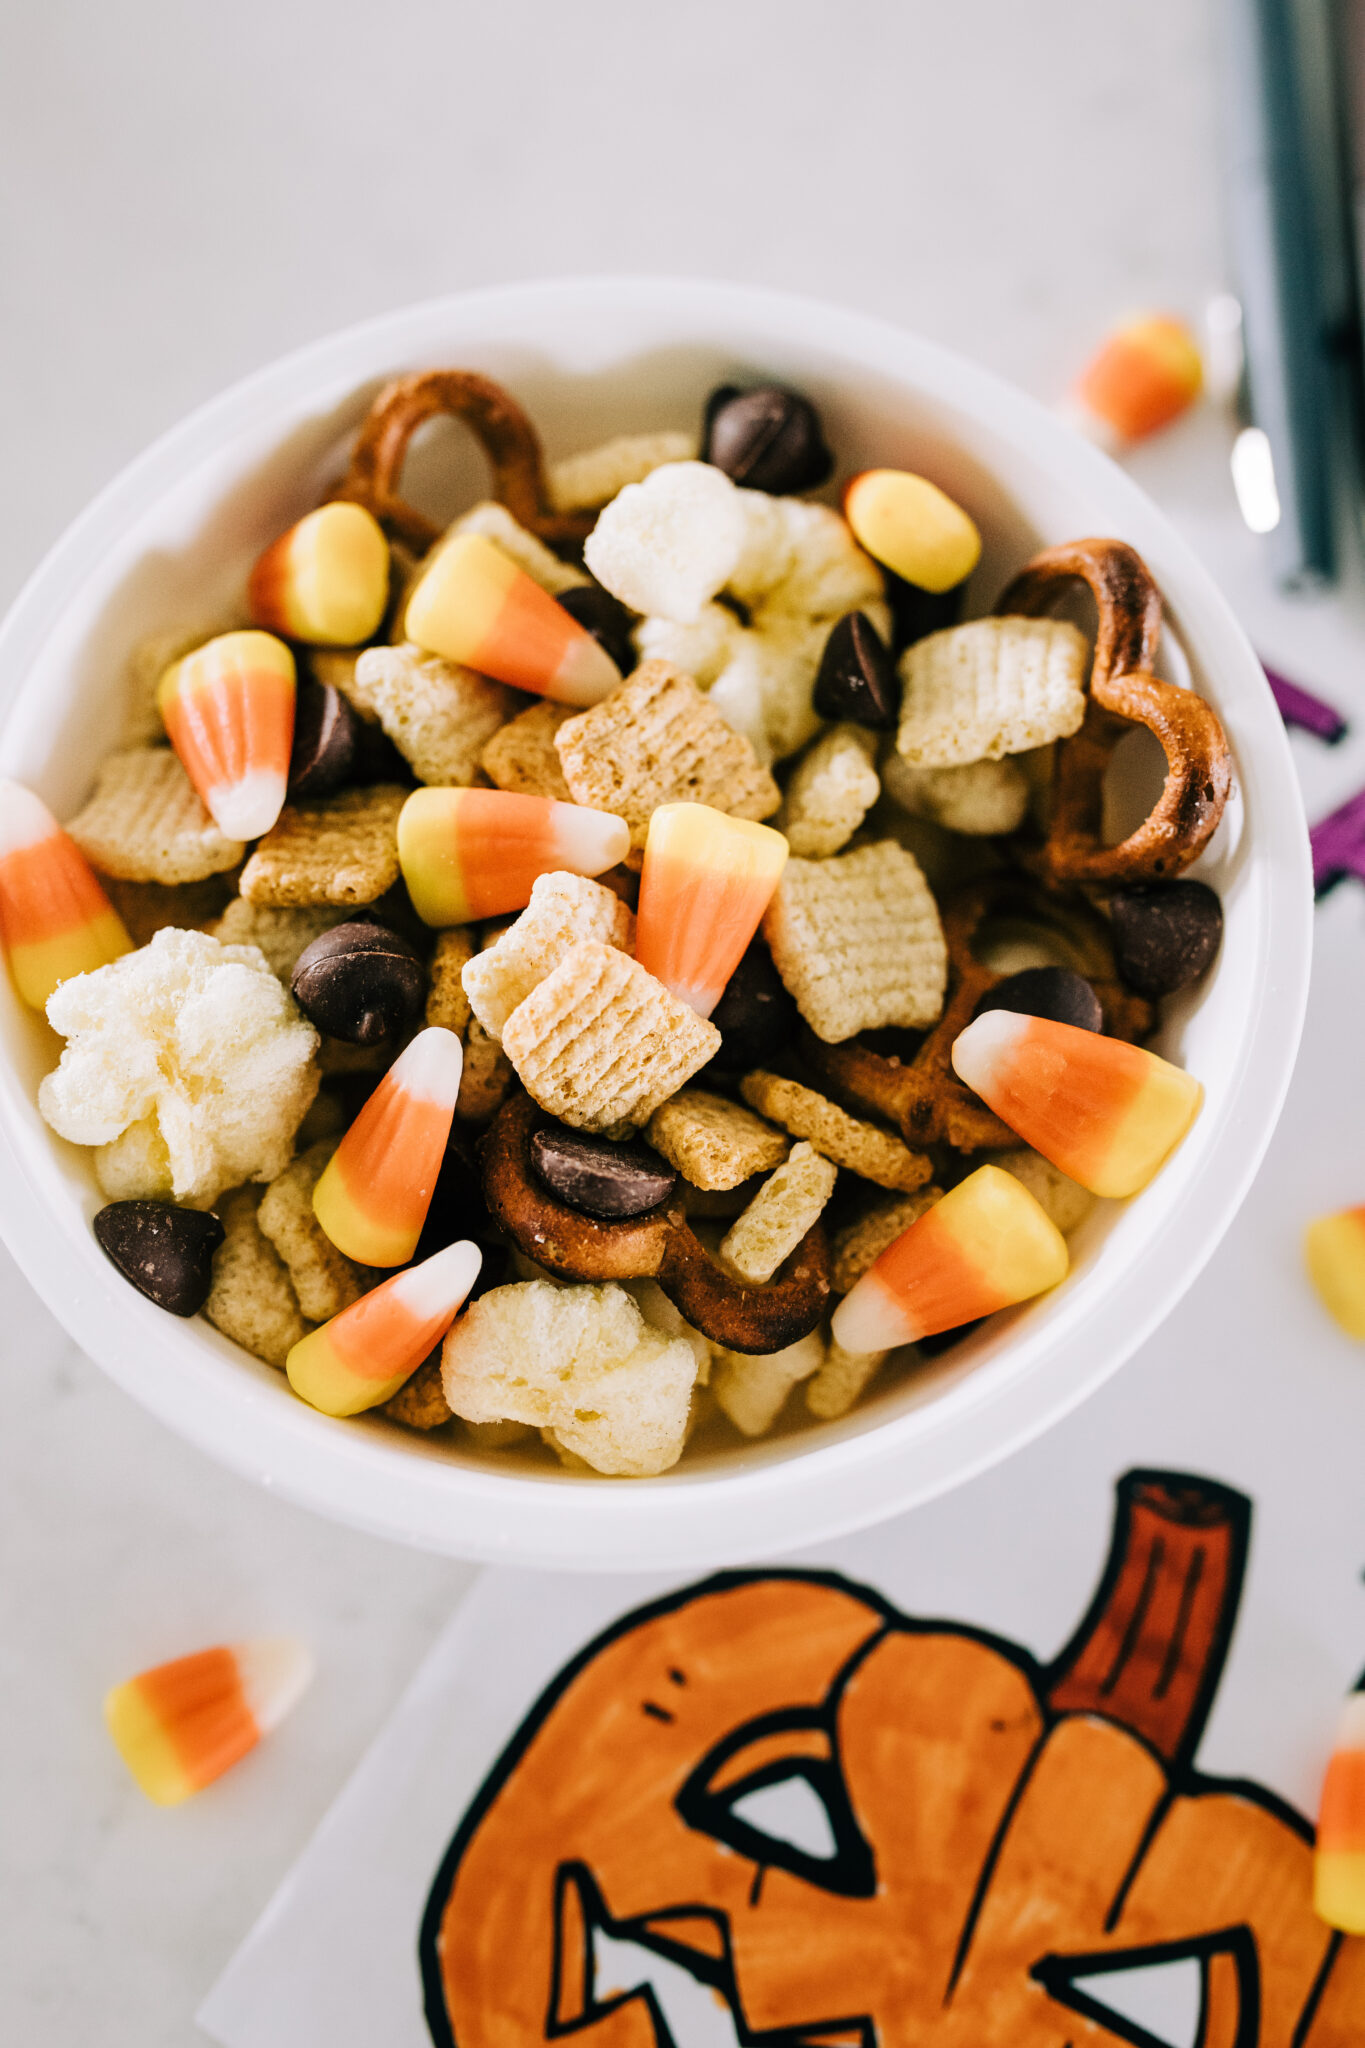 Quick and Easy Fall Snack Mix for Kids, #fallsnackmix #harvestmix #candycorn Celebrate Halloween and Fall with this snack mix made with better ingredients and less sugar than the typical mix.